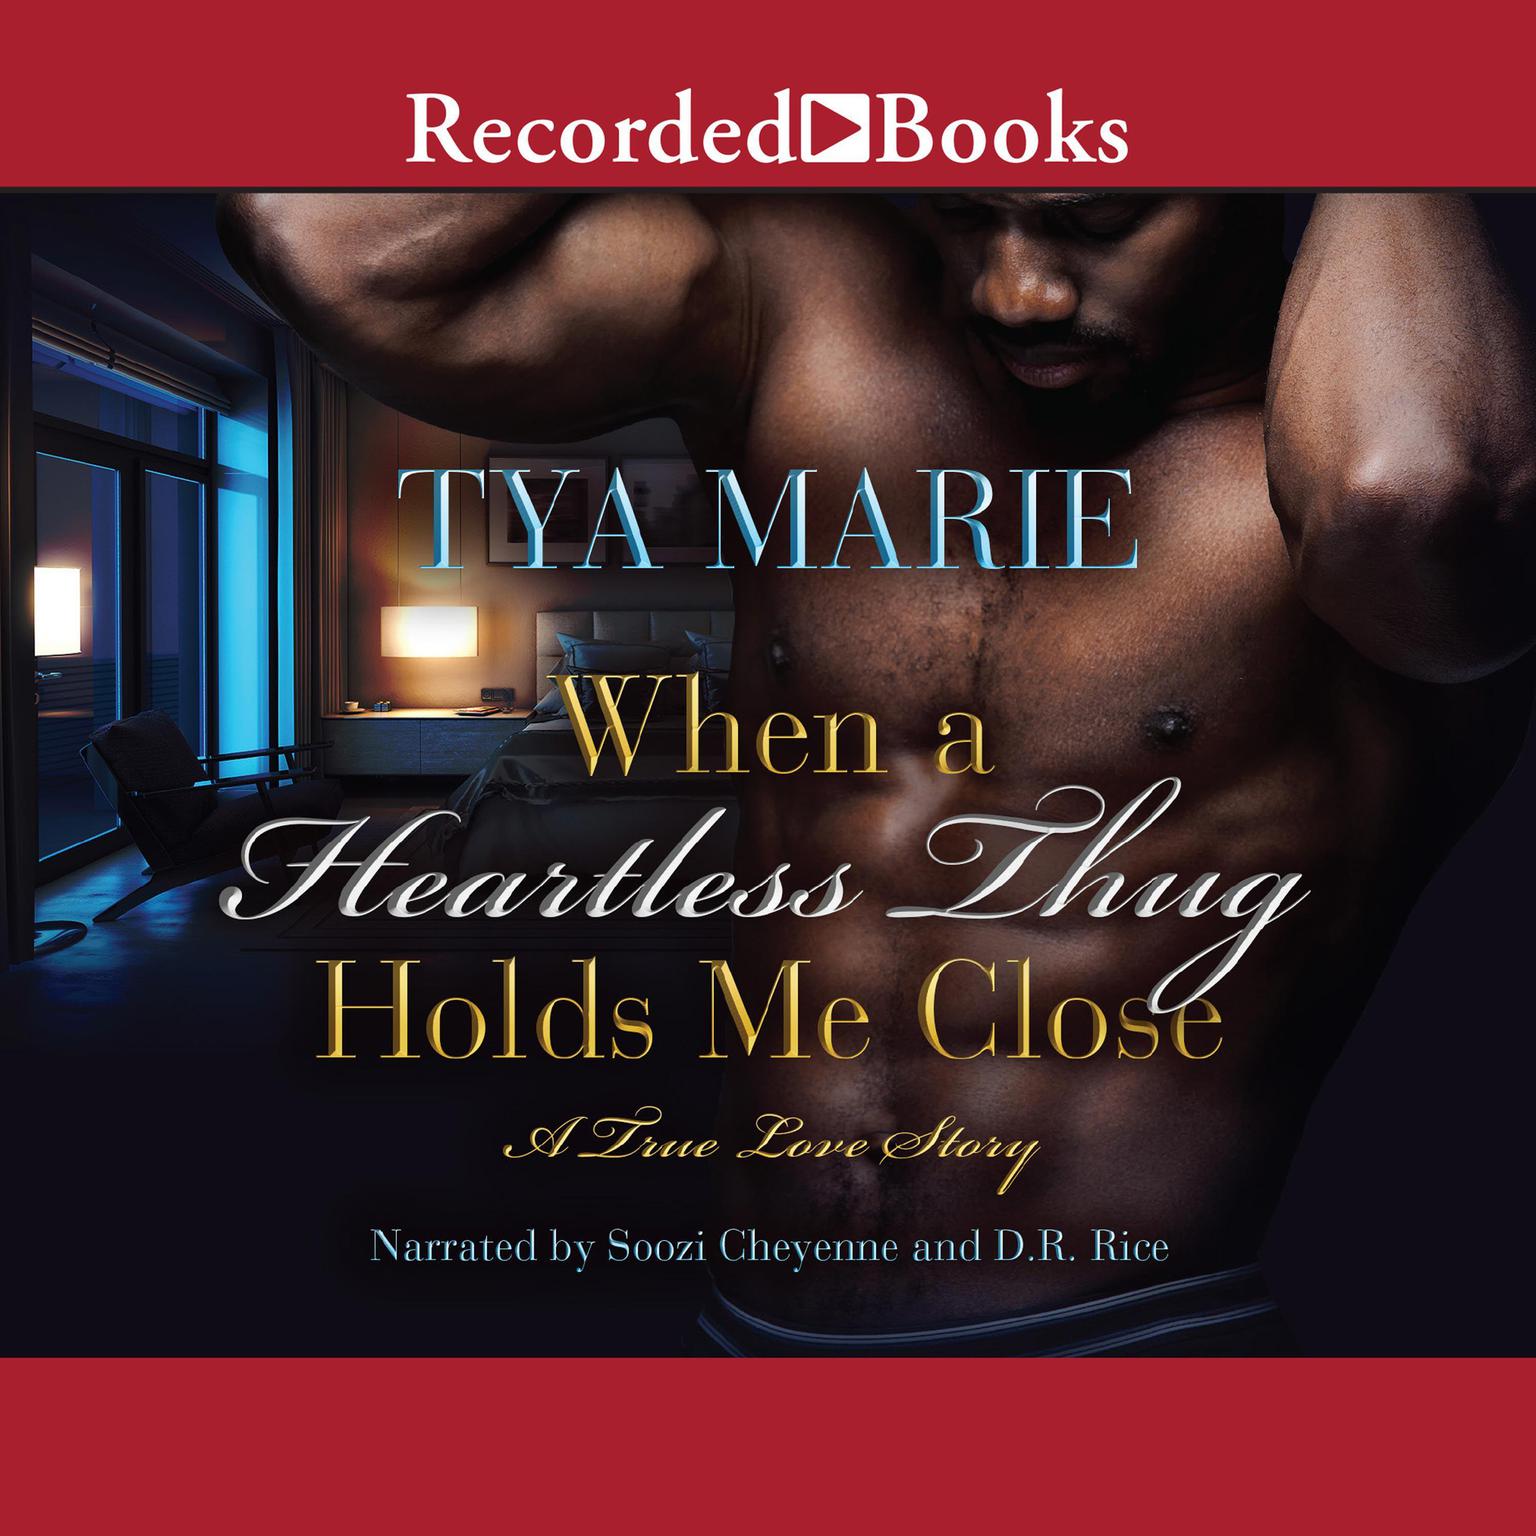 When a Heartless Thug Holds Me Close Audiobook, by Tya Marie